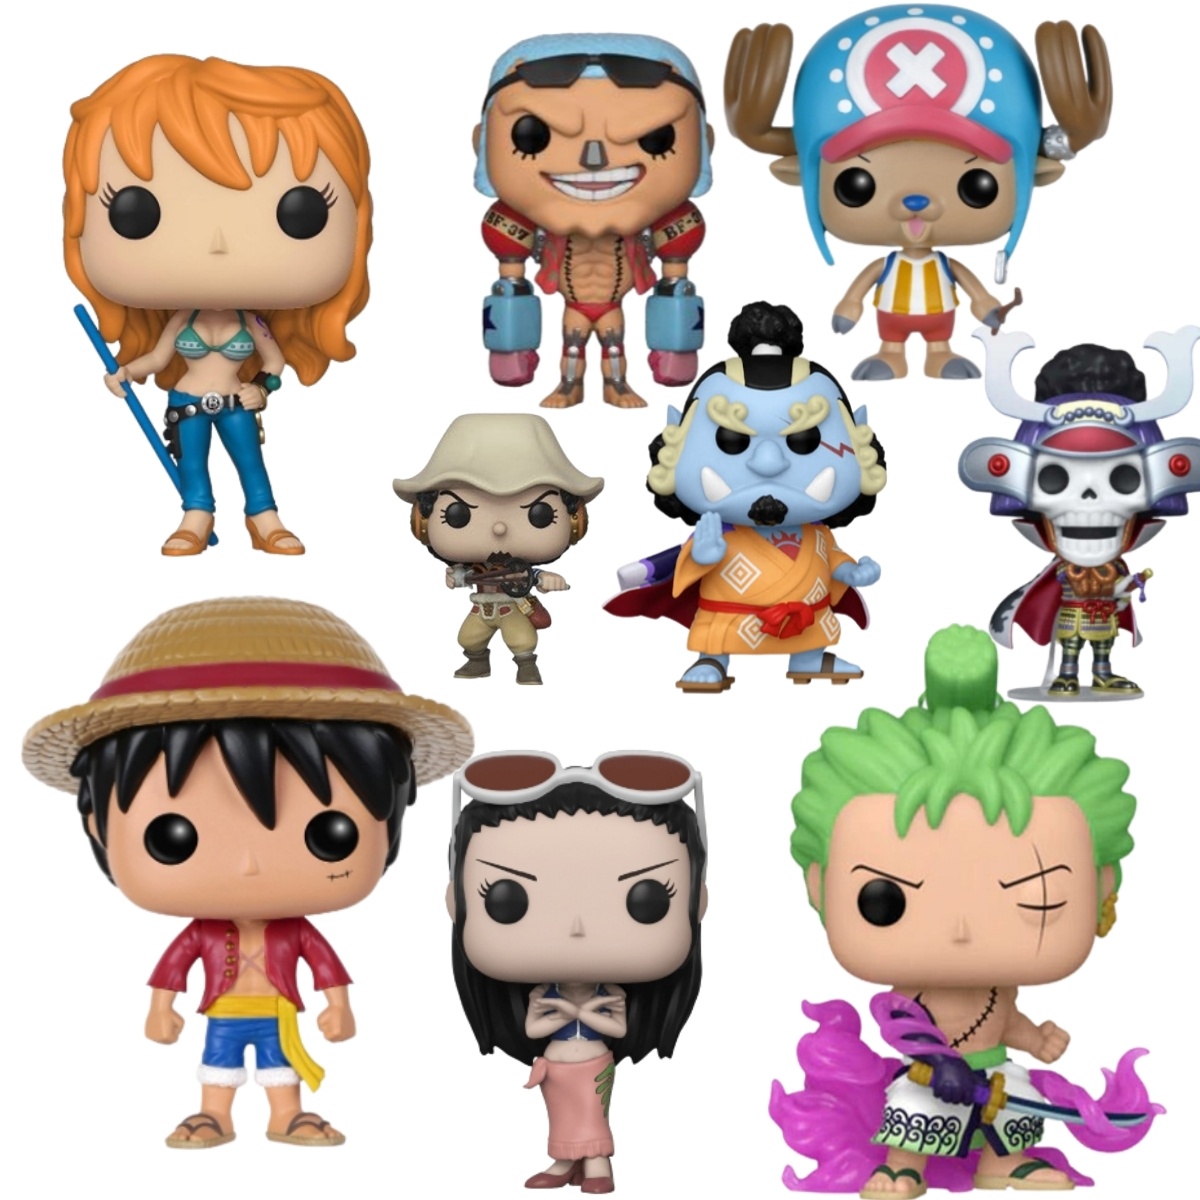 One Piece - Straw Hat Pirates, a crew of 9 members.